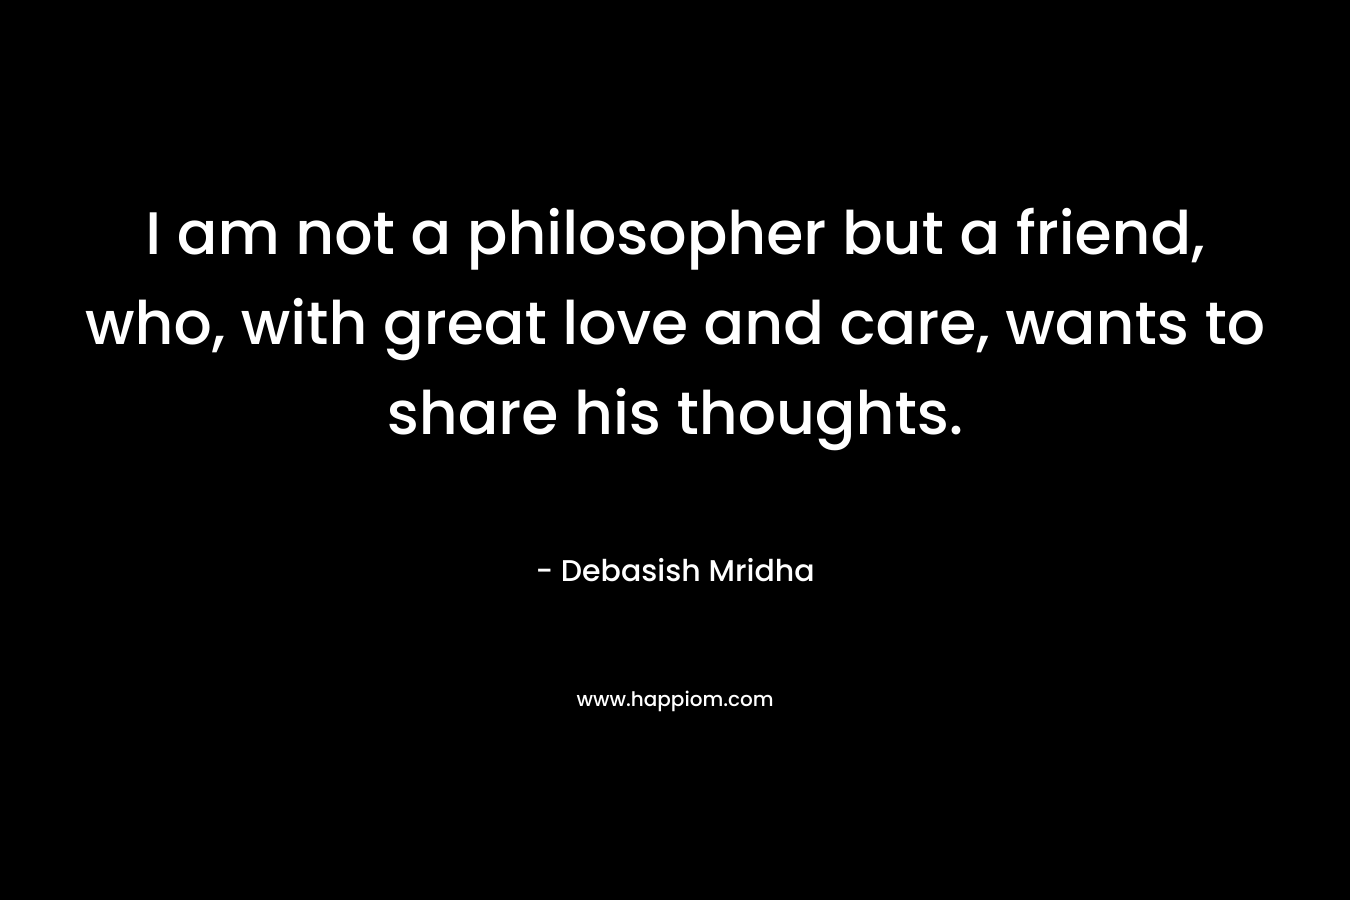 I am not a philosopher but a friend, who, with great love and care, wants to share his thoughts.